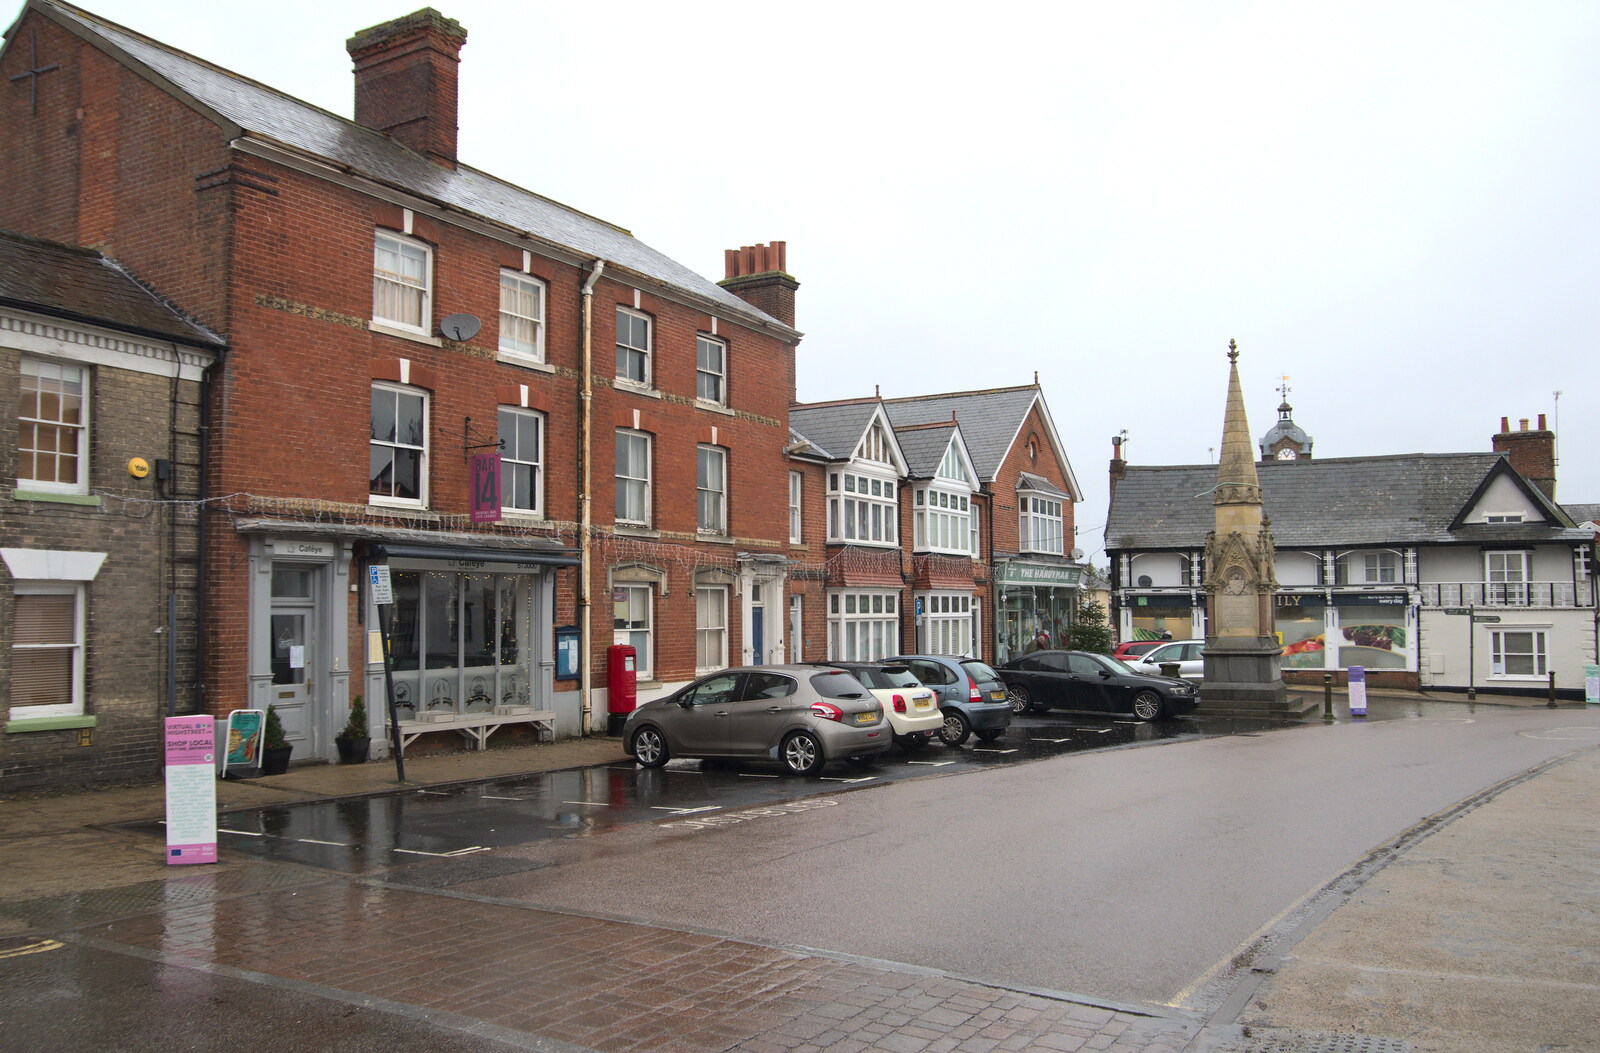 Eye market place from New Year's Day, Brome, Suffolk - 1st January 2022